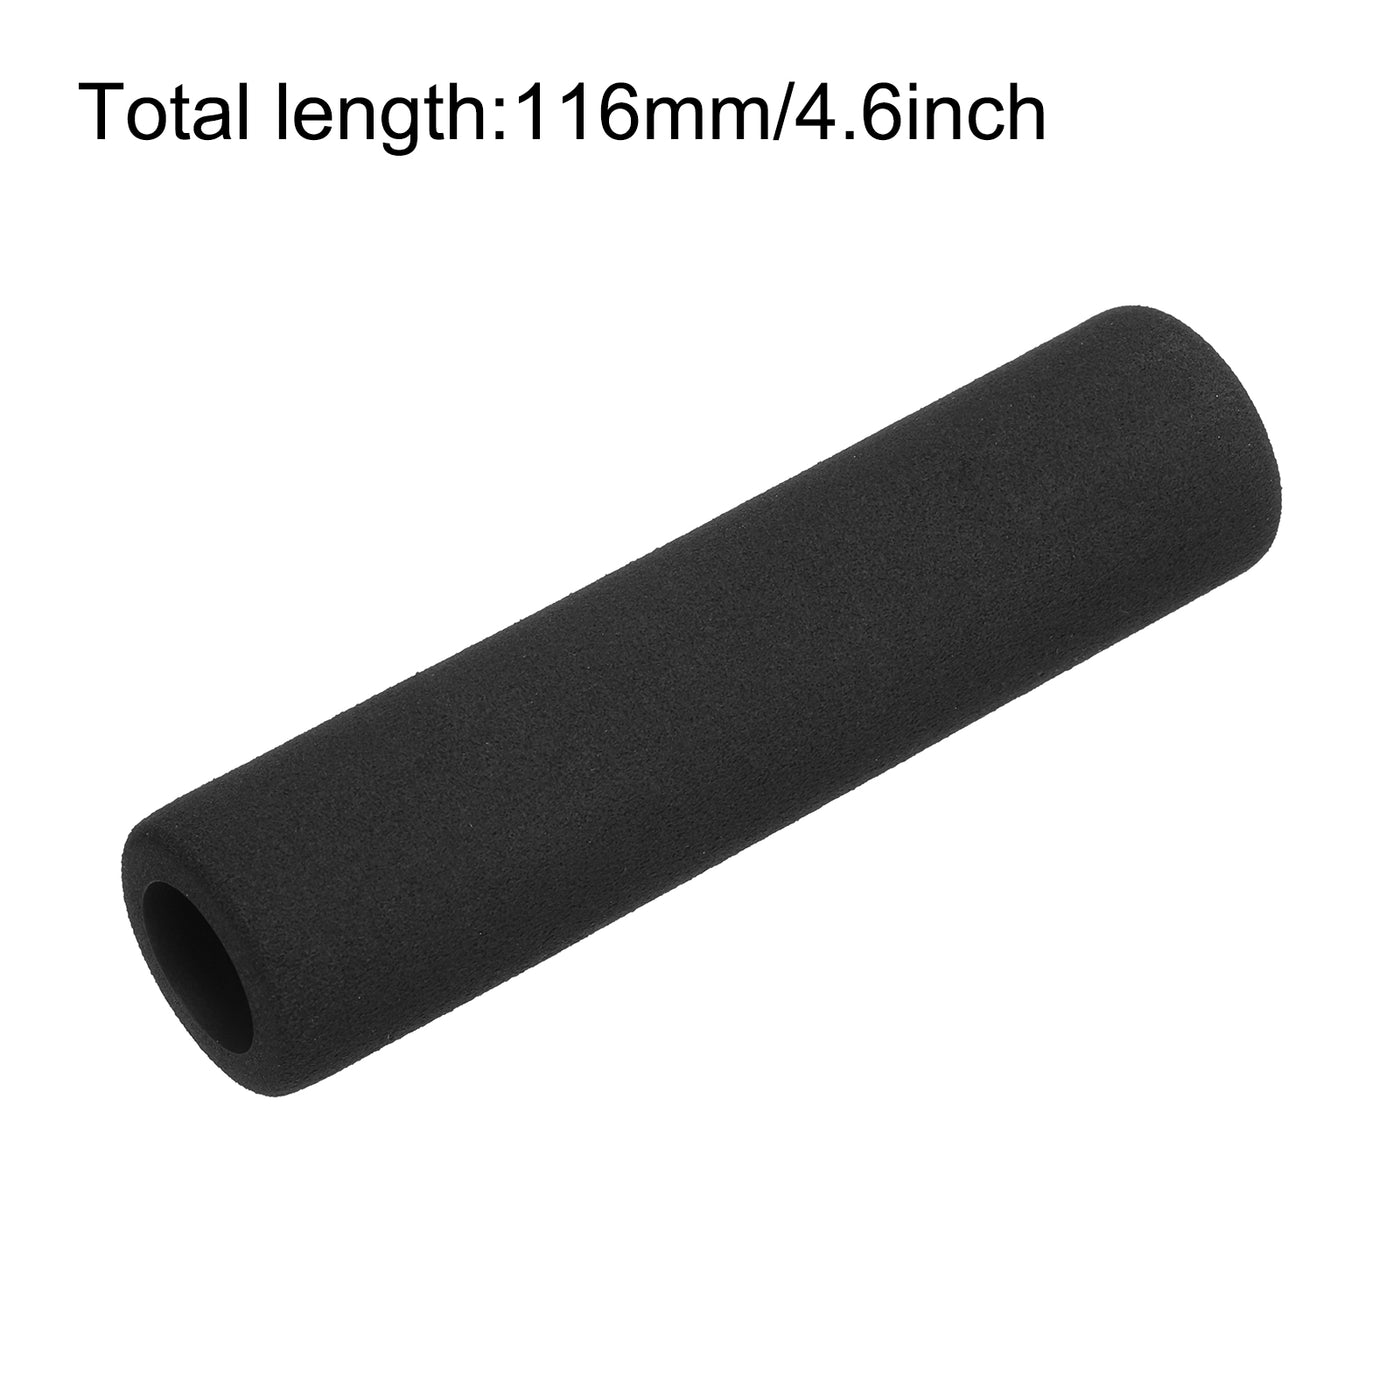 uxcell Uxcell Pipe Insulation Tube Foam Tubing for Handle Grip Support 17mm ID 27mm OD 116mm Length Heat Preservation Black